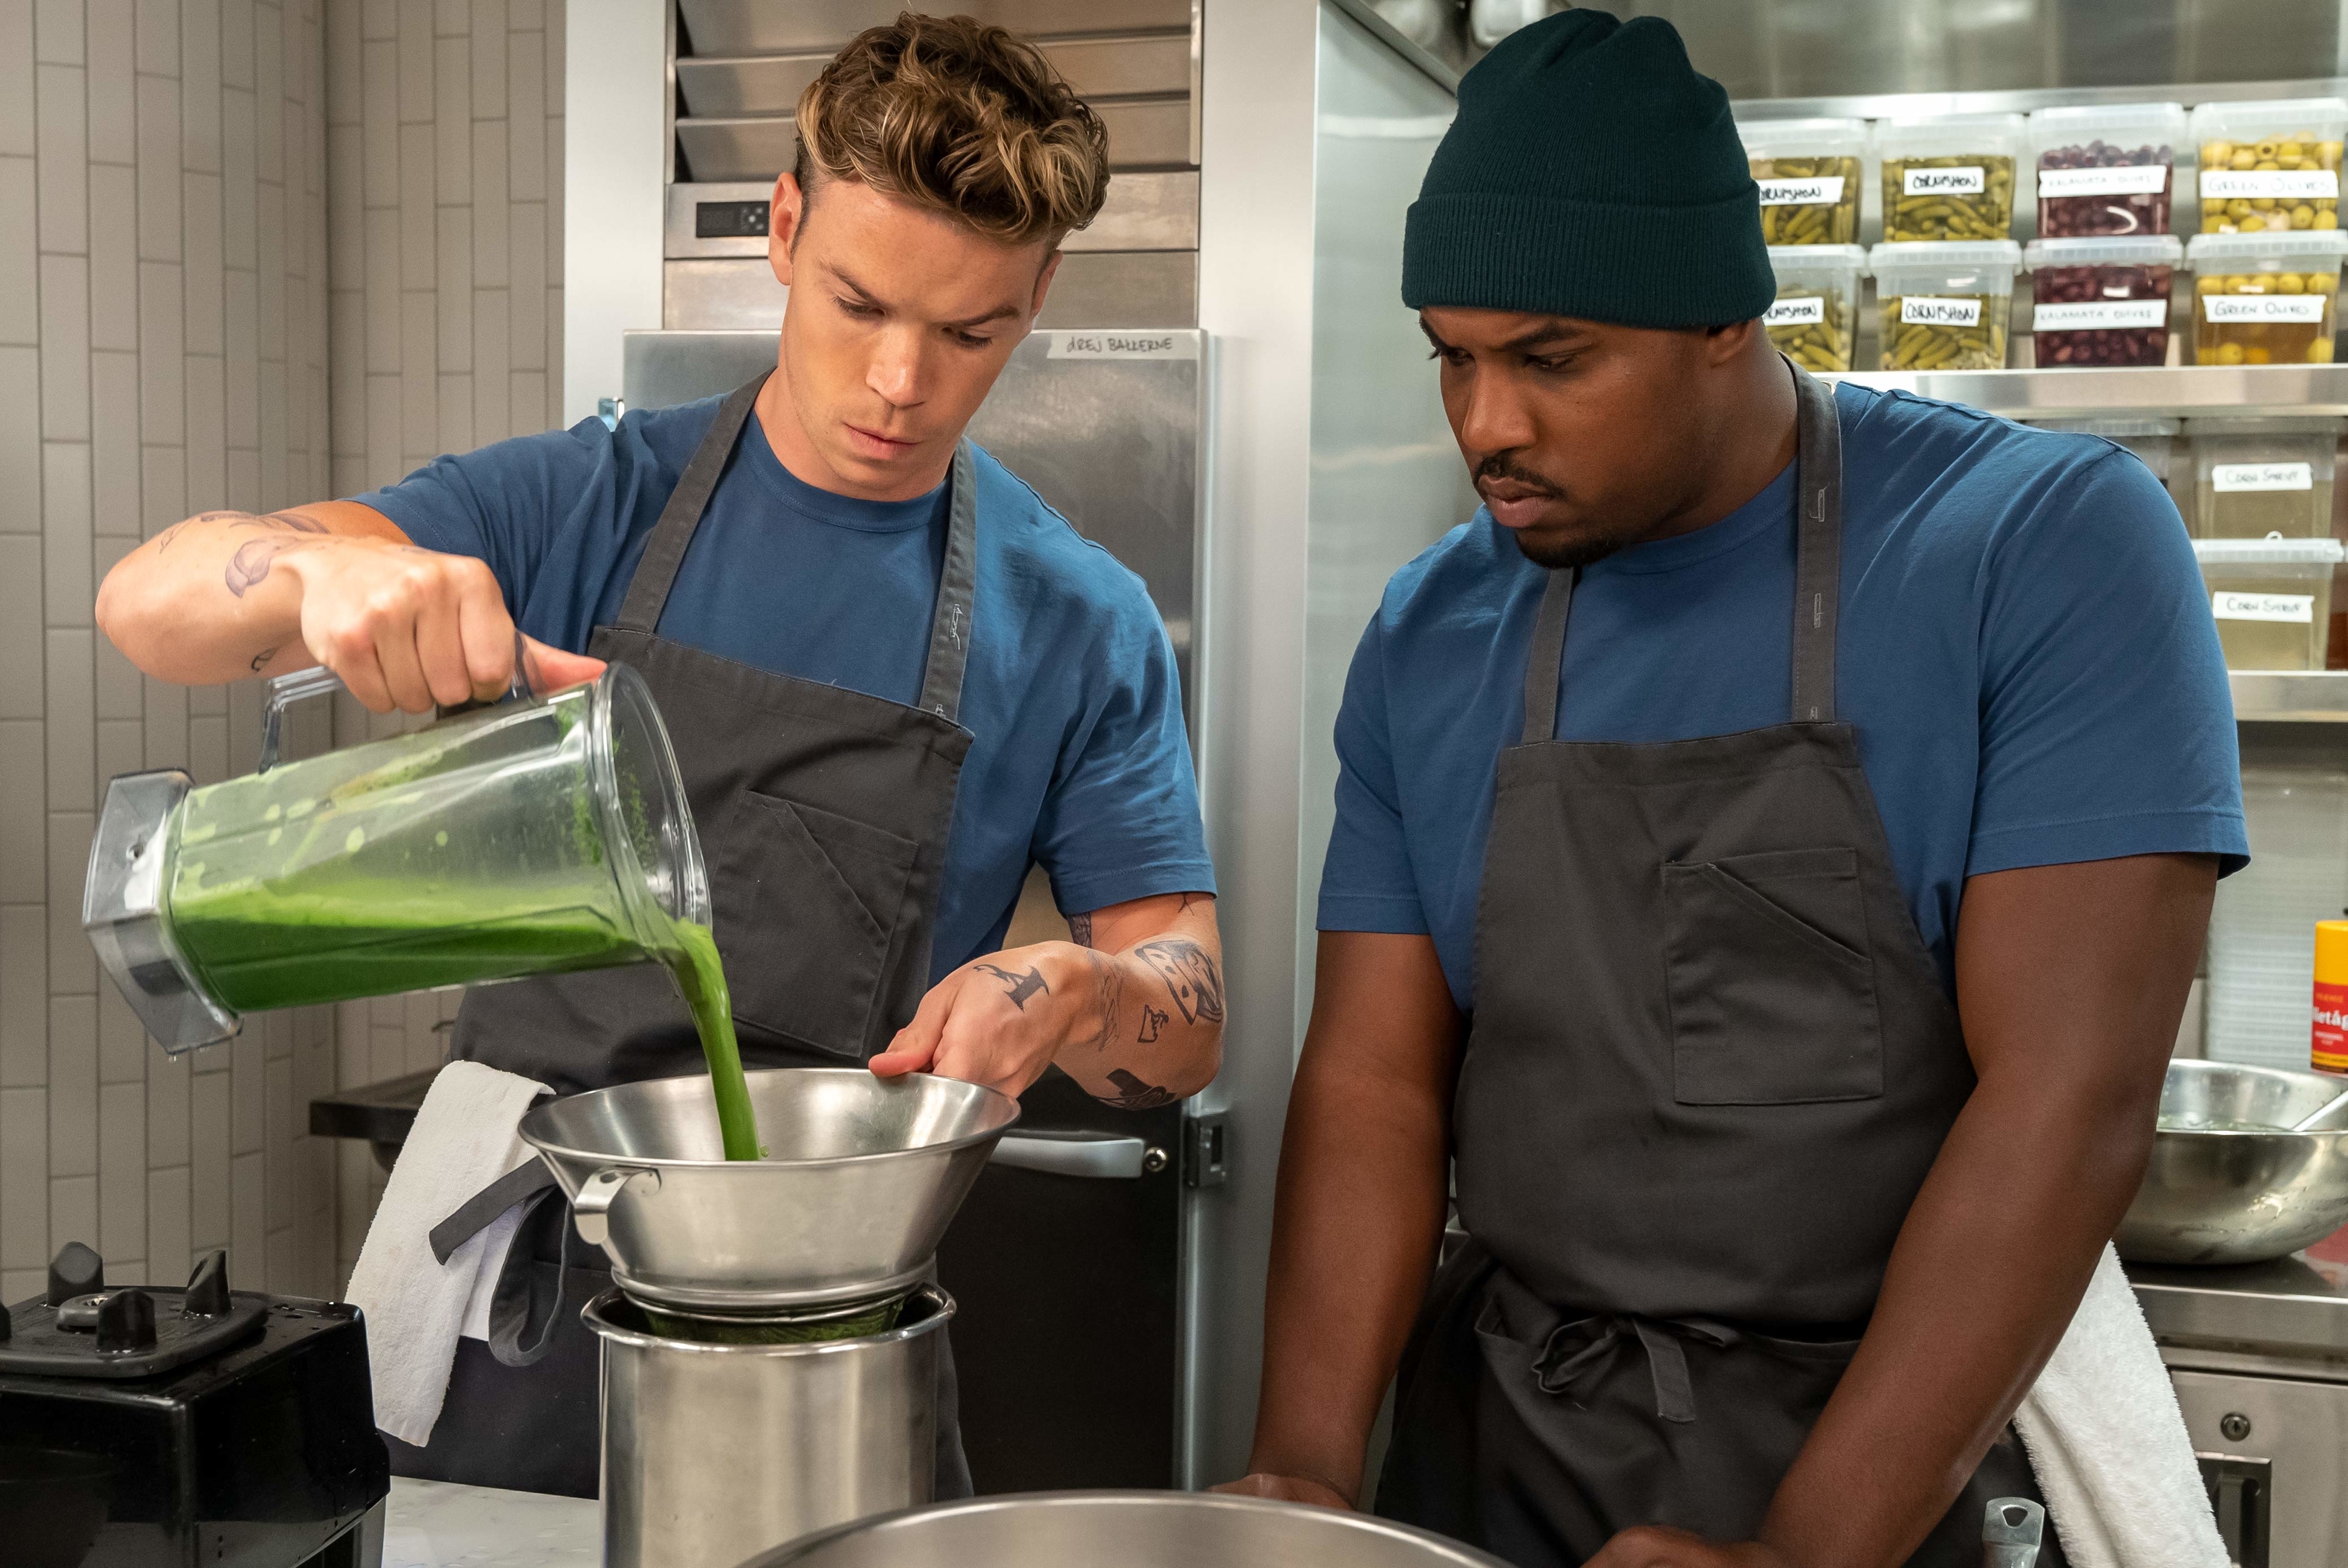 Will Poulter cooking in a kitchen alongside Lionel Boyce in The Bear